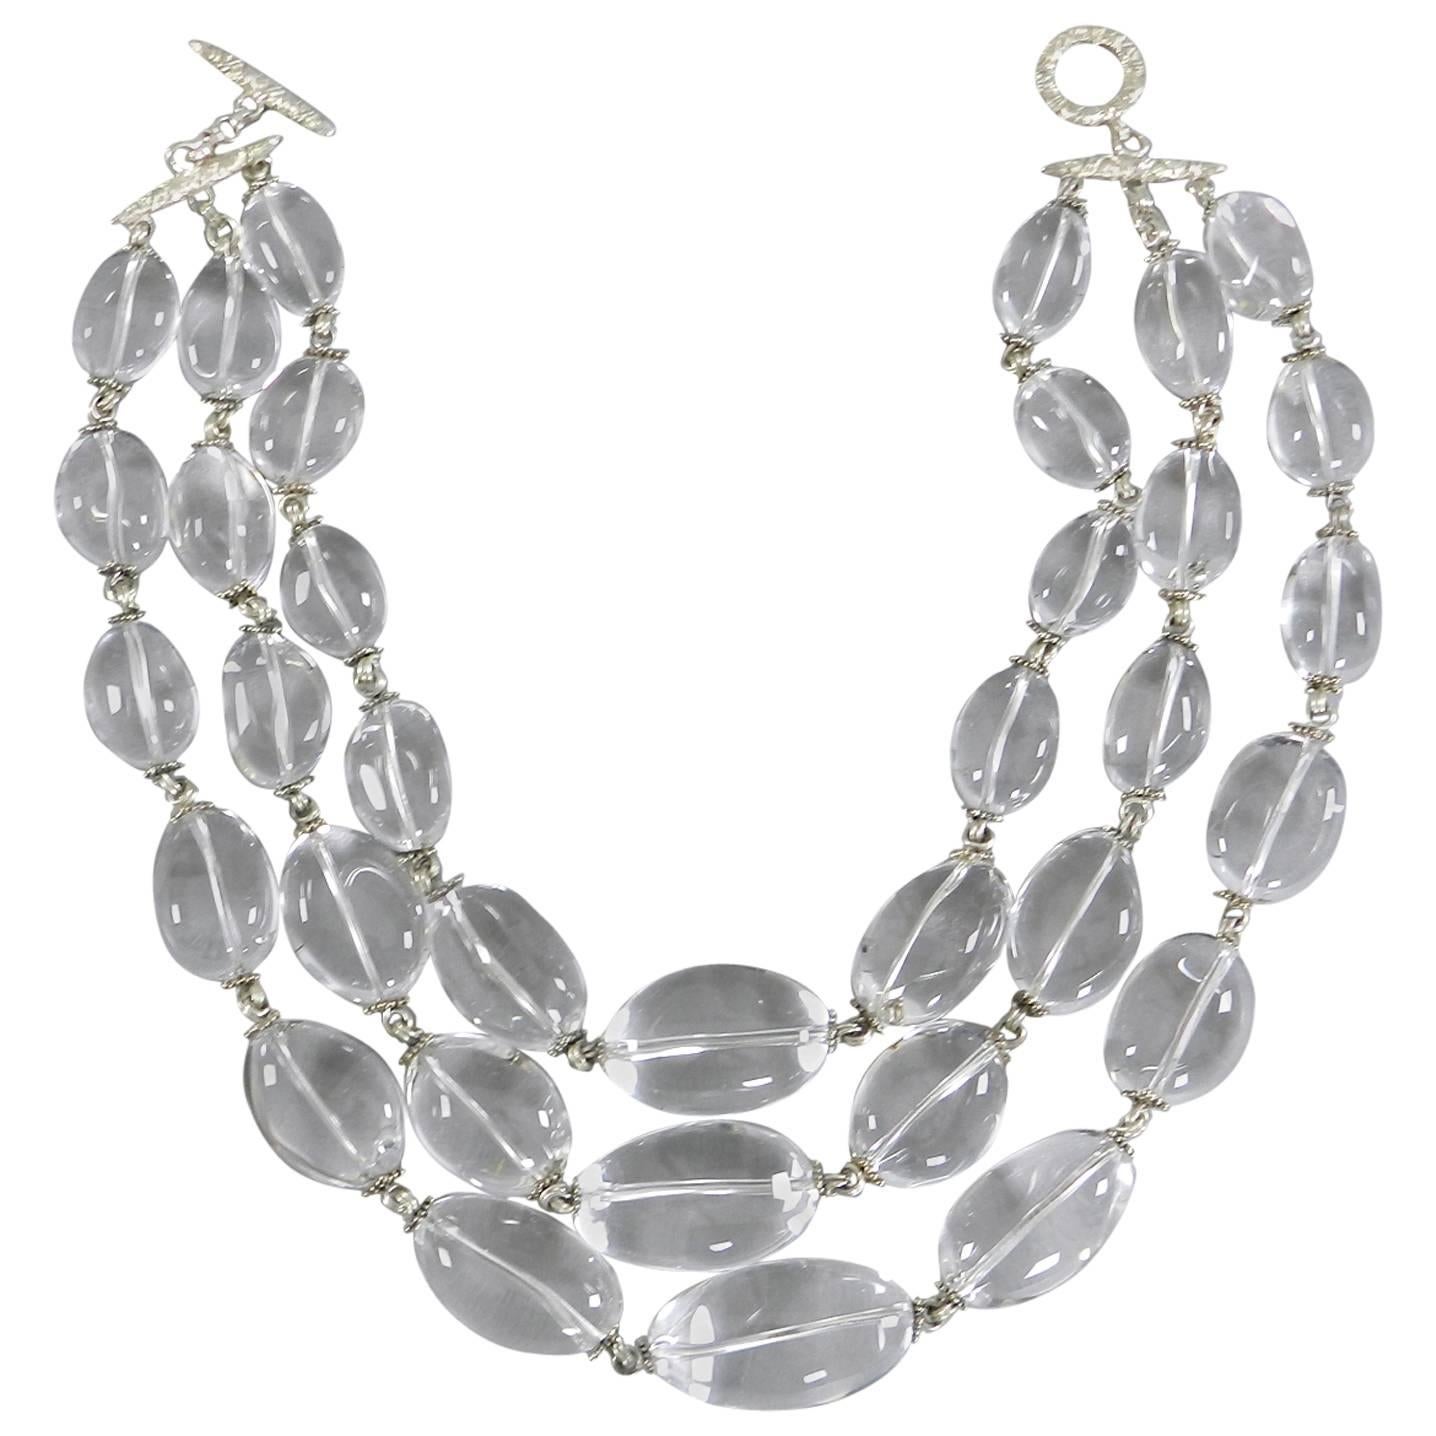 Large Chunky Rock Crystal Triple Strand Bead Necklace 